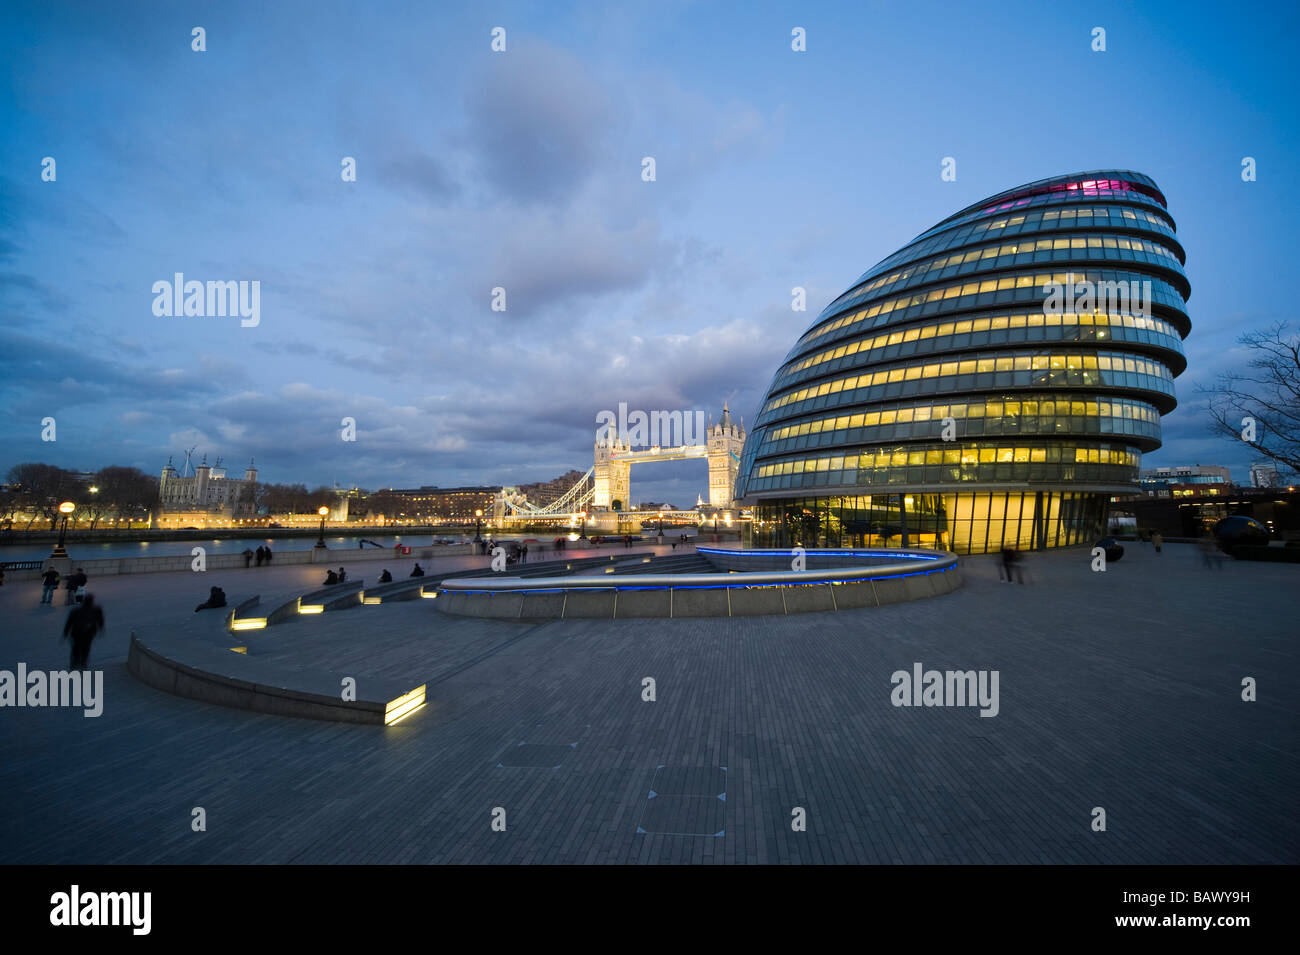 Greater London Authority di notte Foto Stock